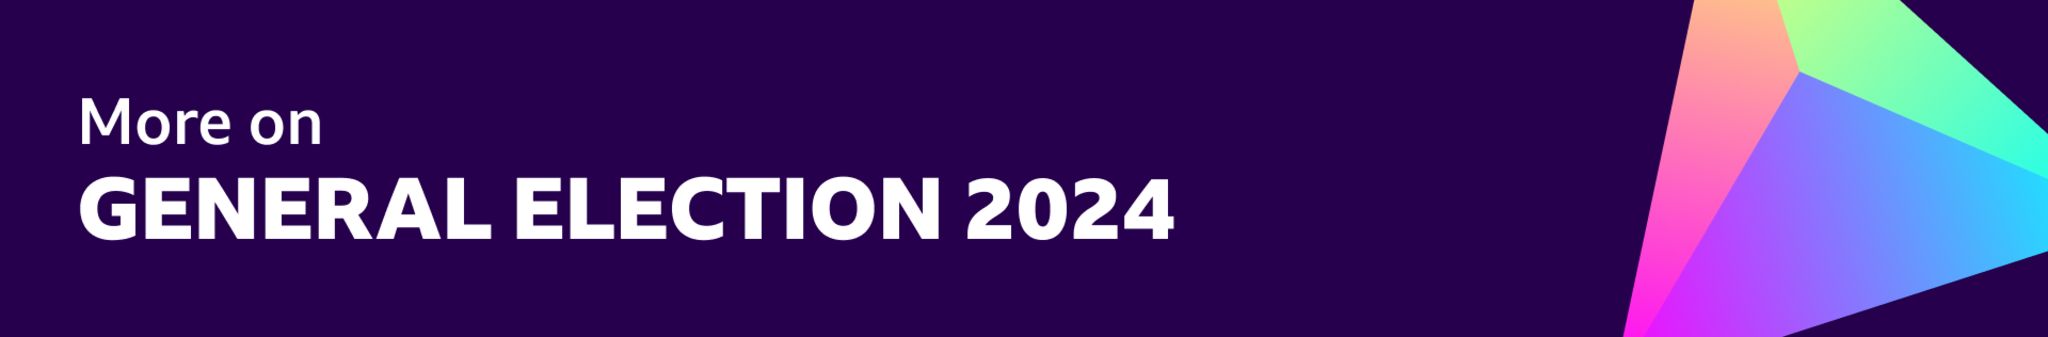 More on general election 2024